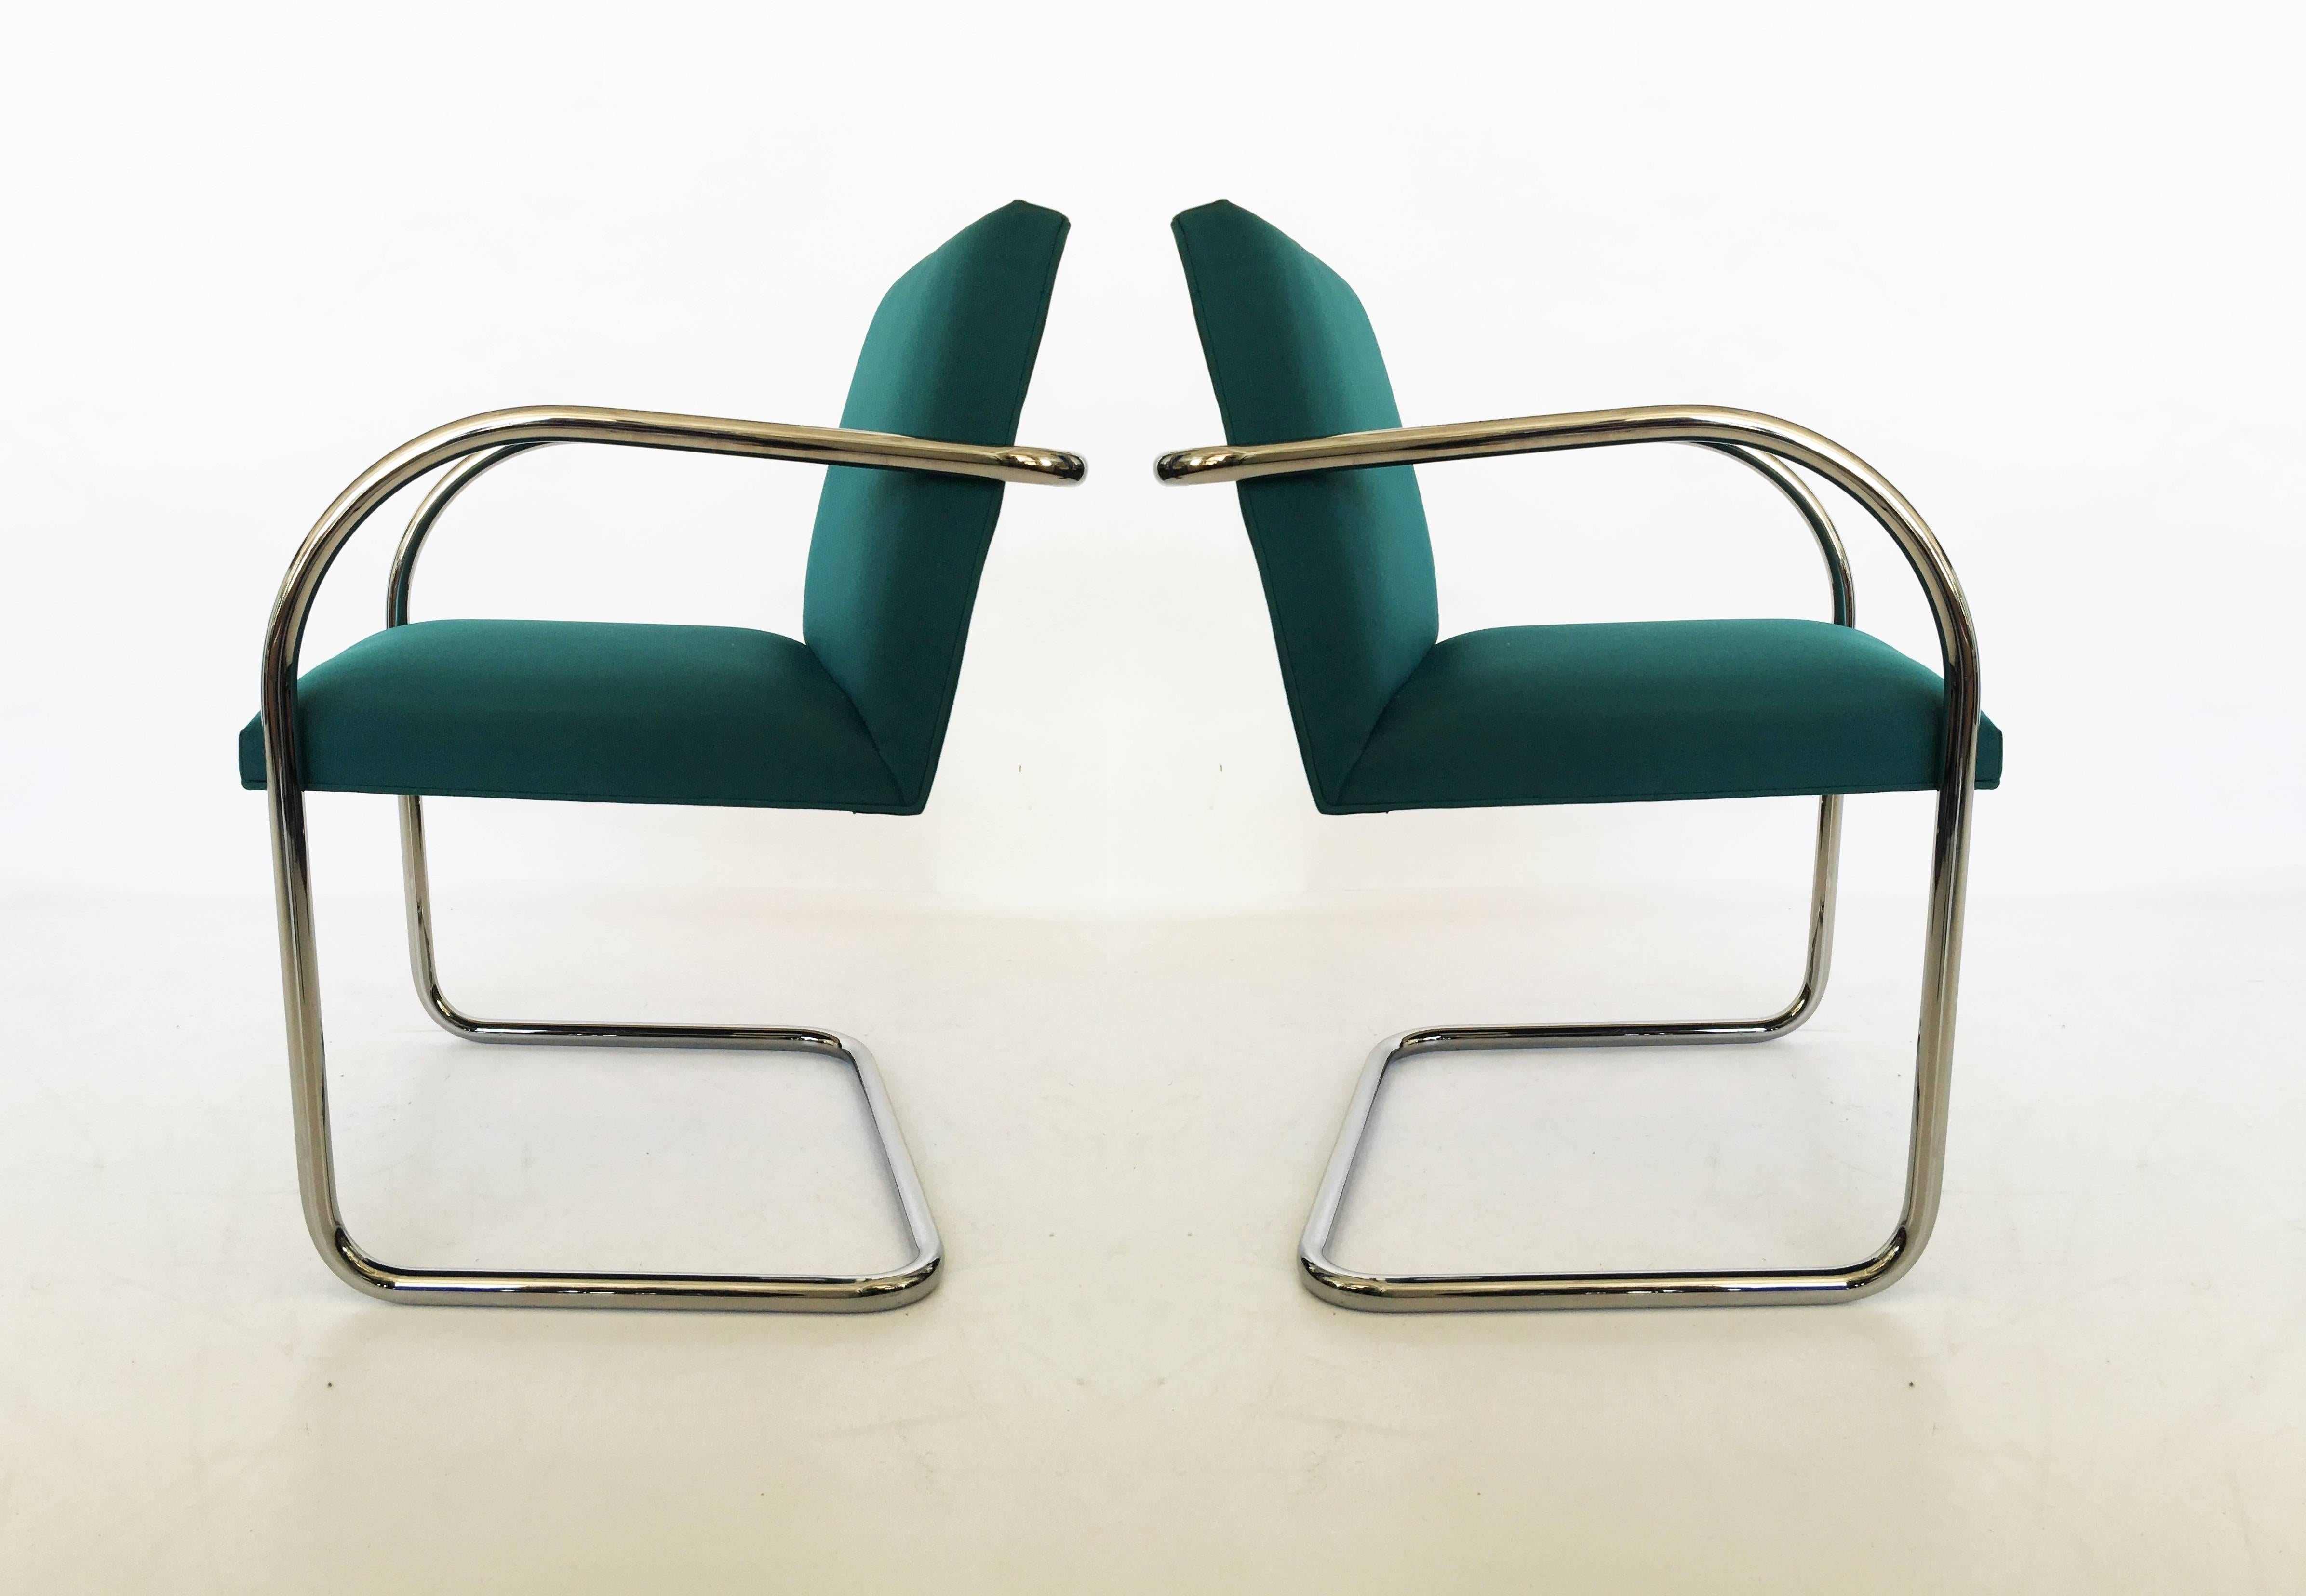 A great set of ten tubular Brno chairs by Mies van der Rohe for Knoll.
Original vintage condition. Chrome is in great condition. Upholstery can be used as is or re-upholstered.